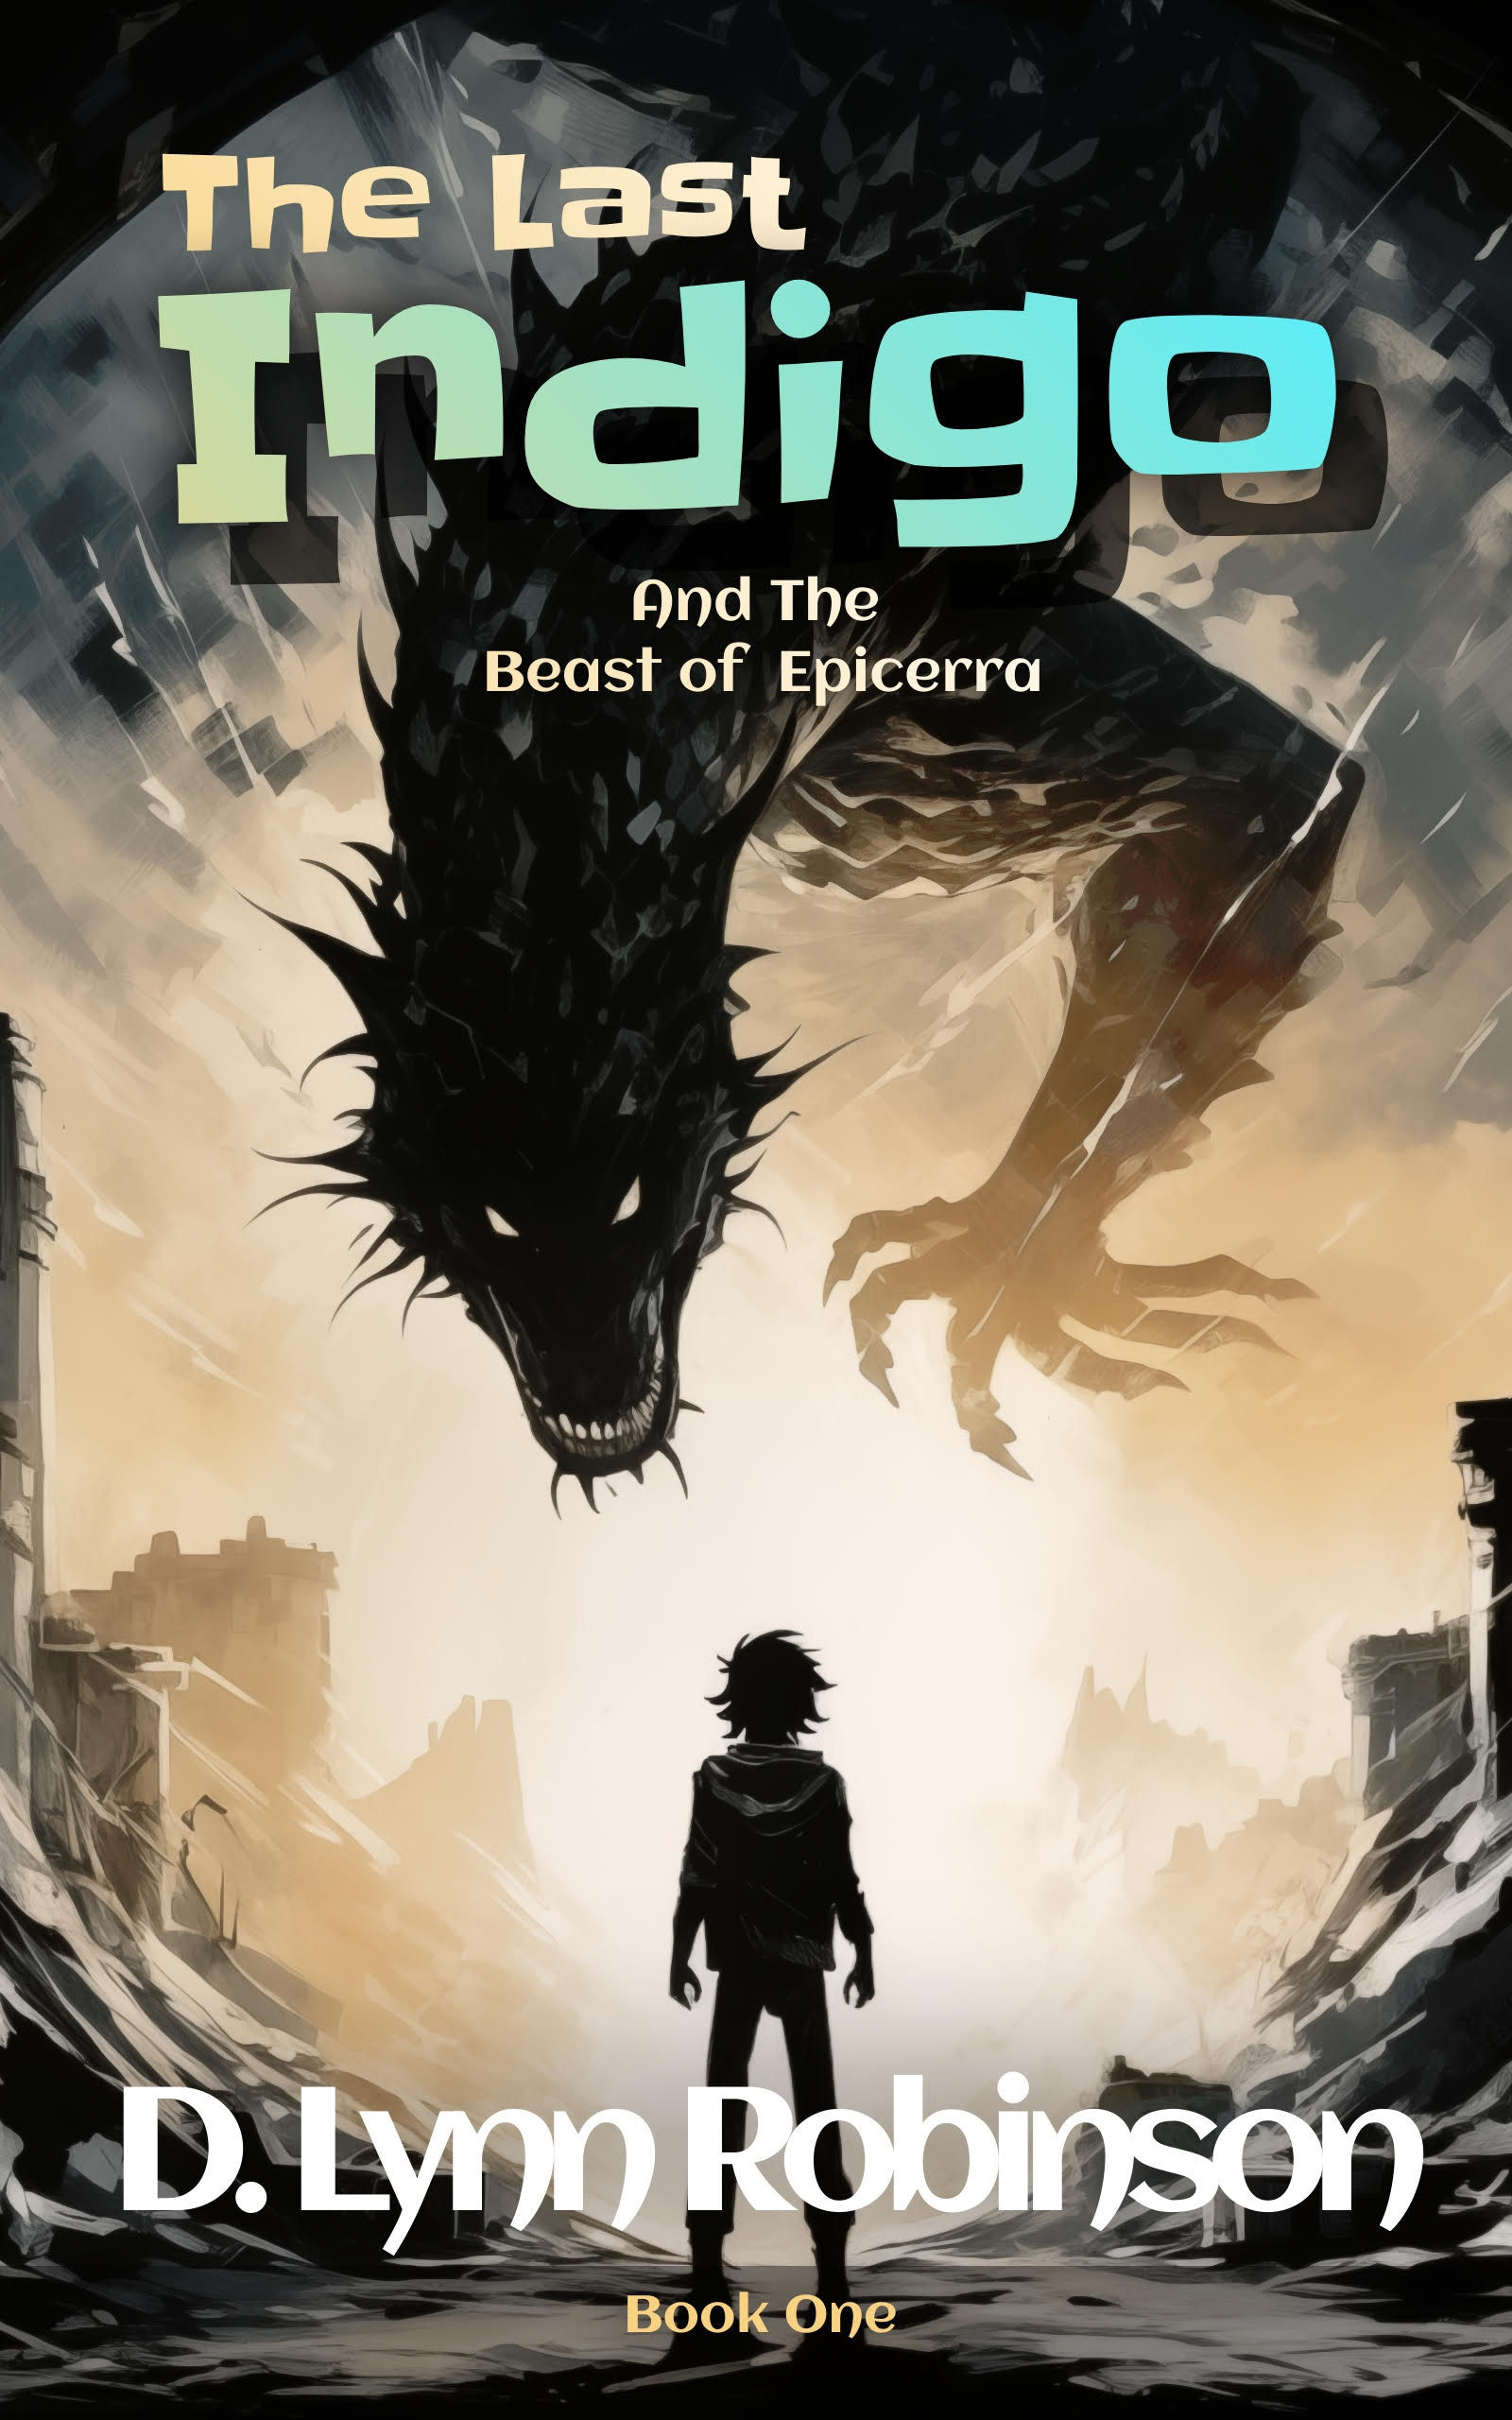 Giveaway: The Last Indigo and the Beast of Epicerra (D. Lynn Robinson) ~ US/CAN ONLY!